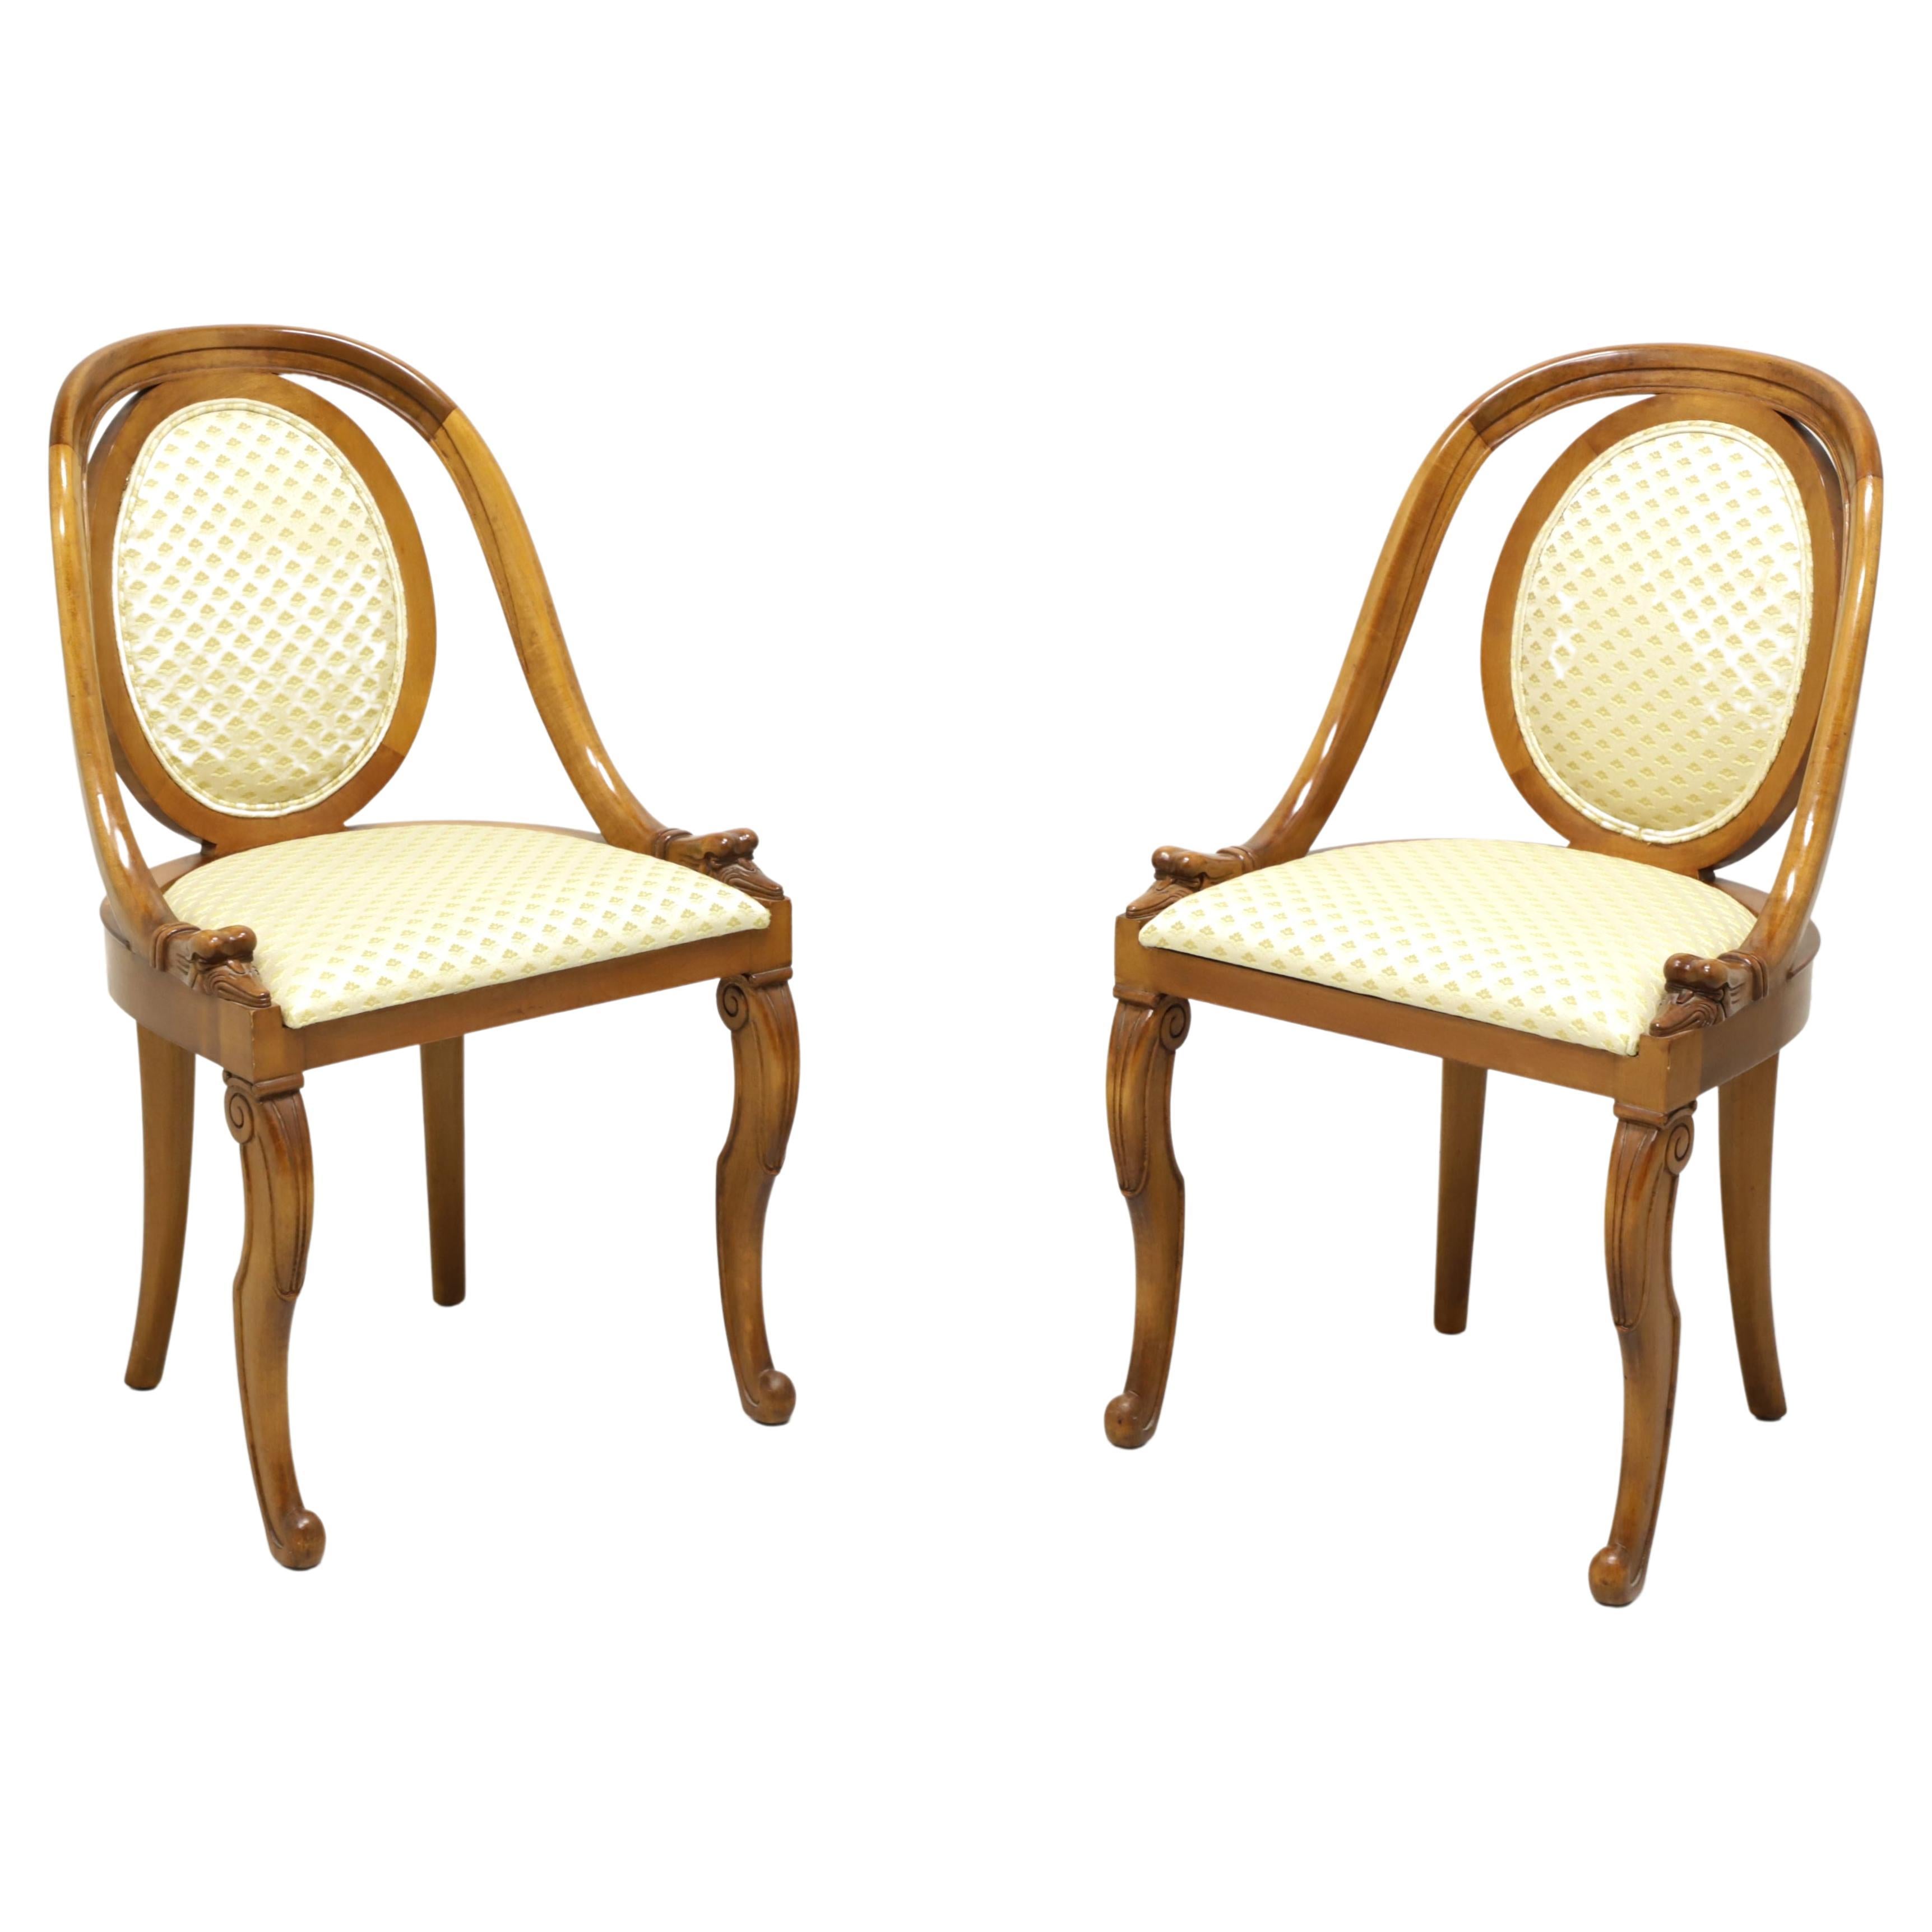 1920's French Art Deco Goosehead Dining Chairs - Pair B